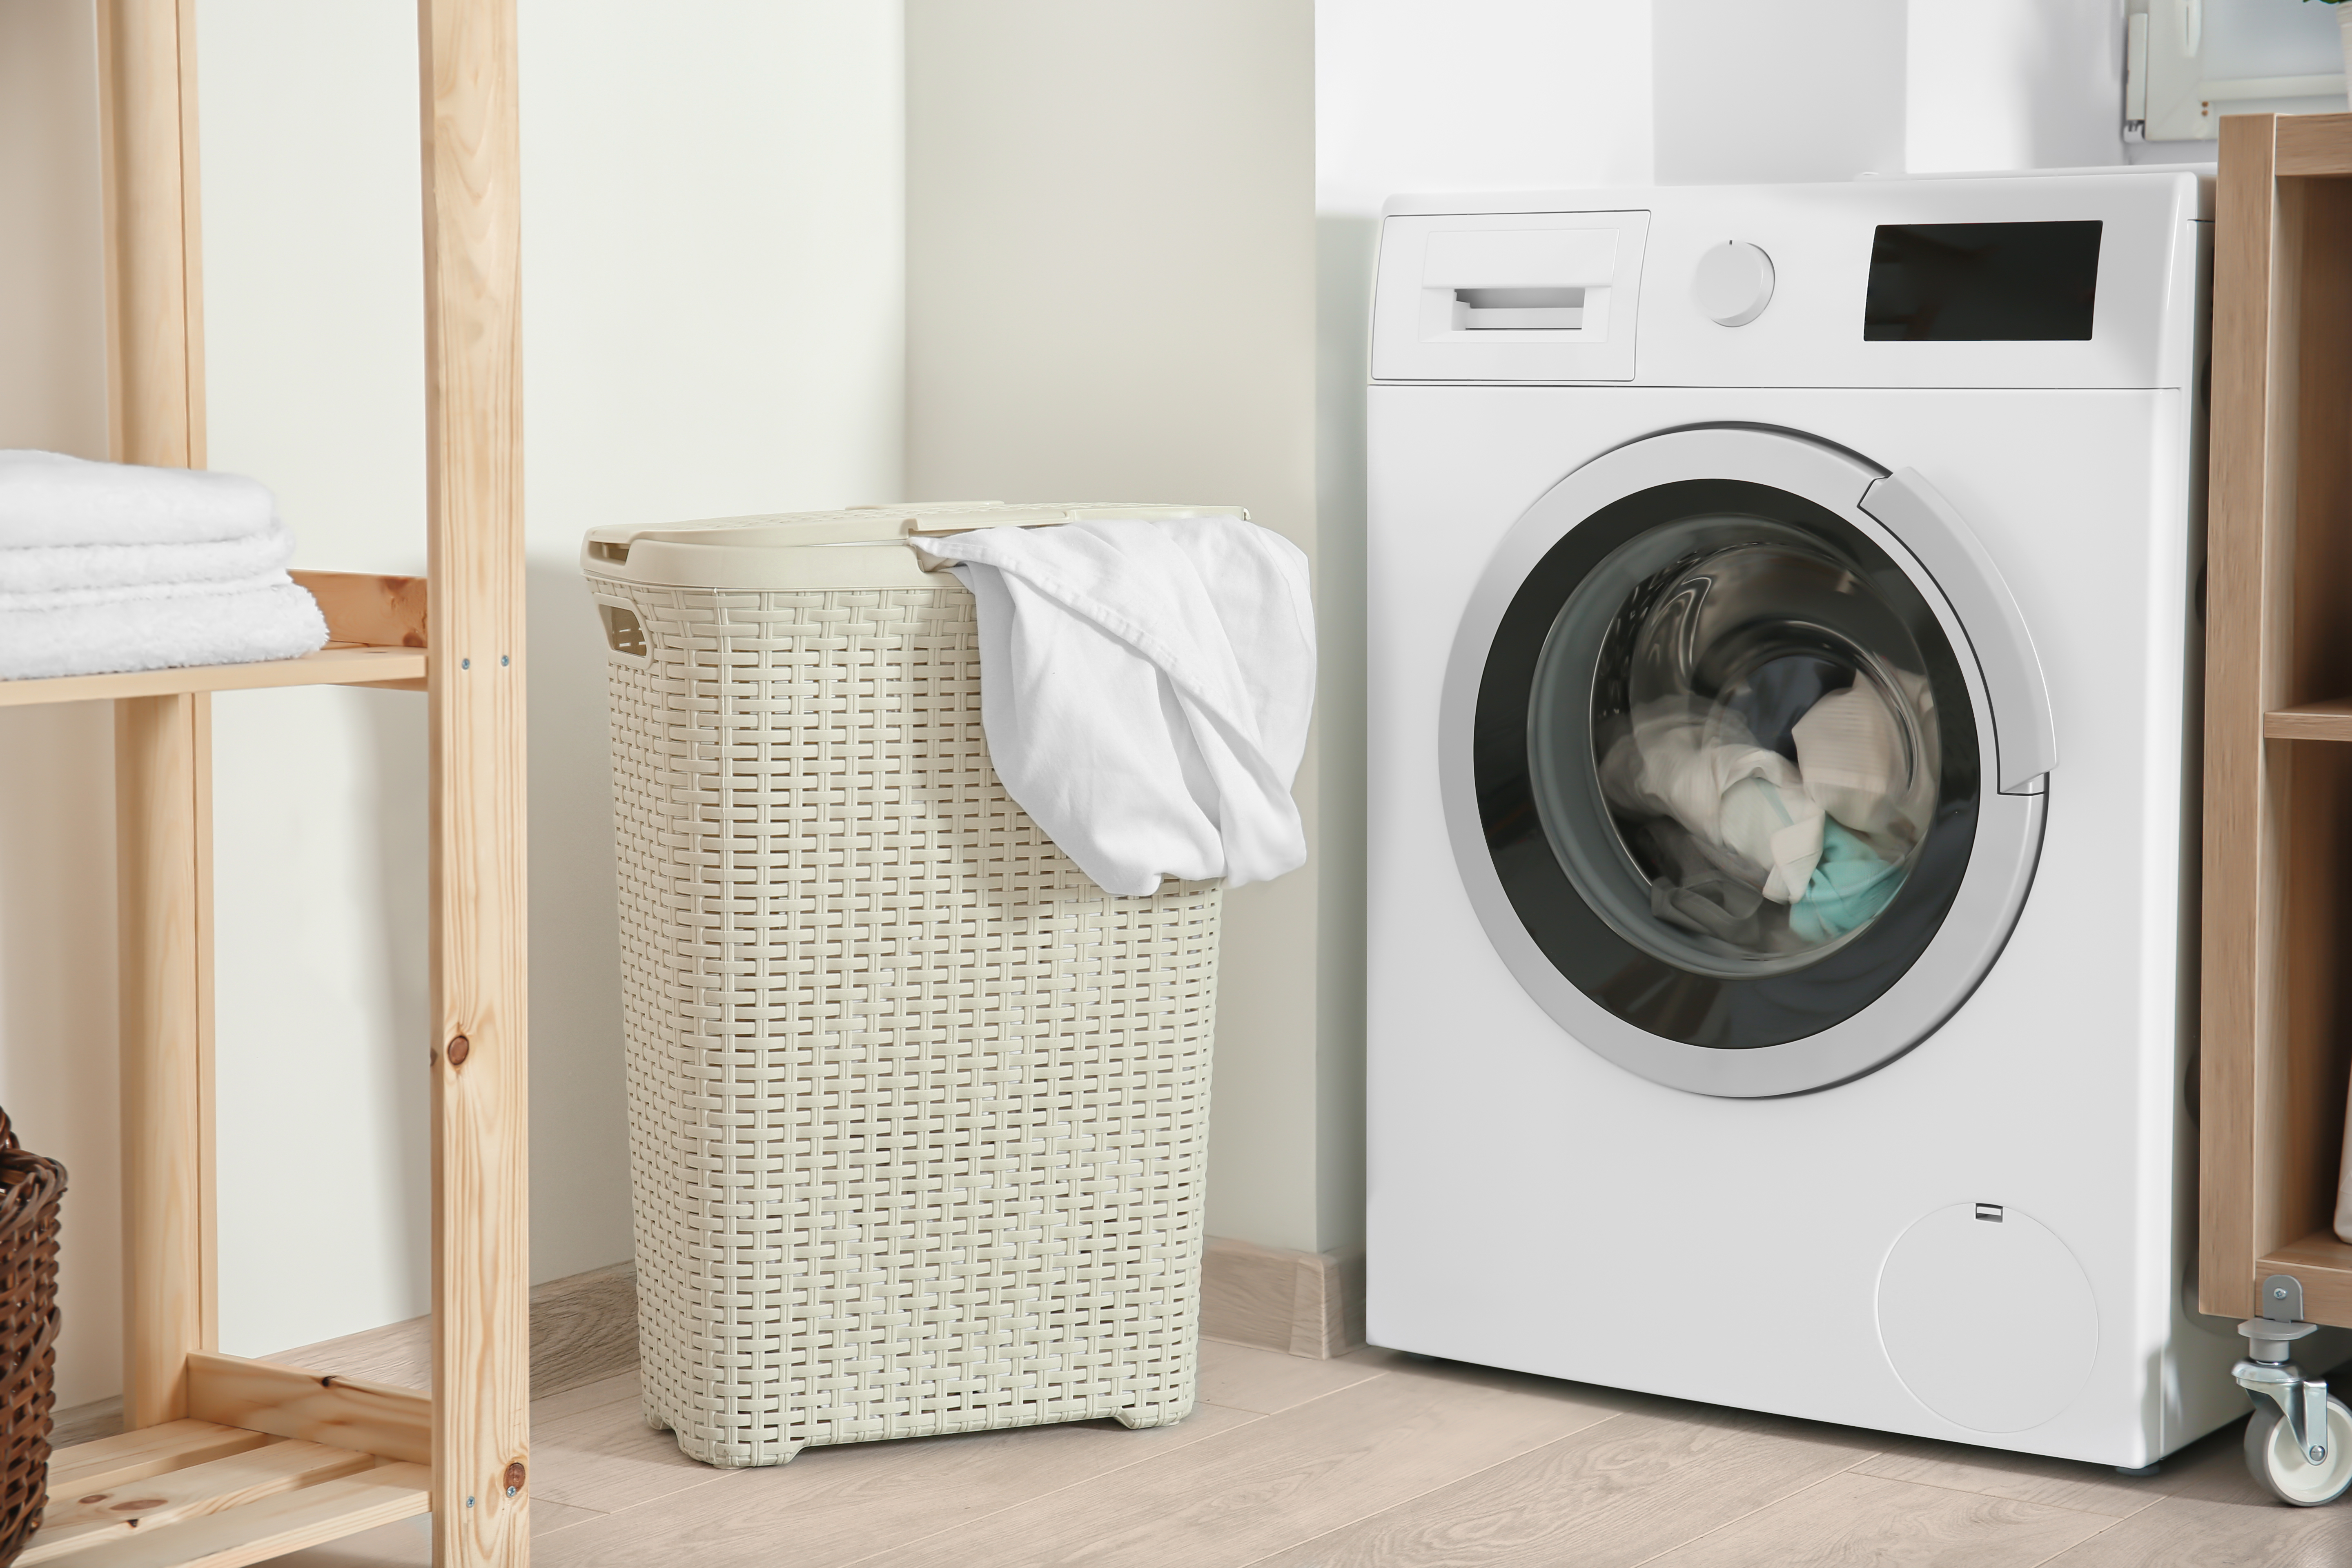 Laundry tips to save time and extend the life of your clothing